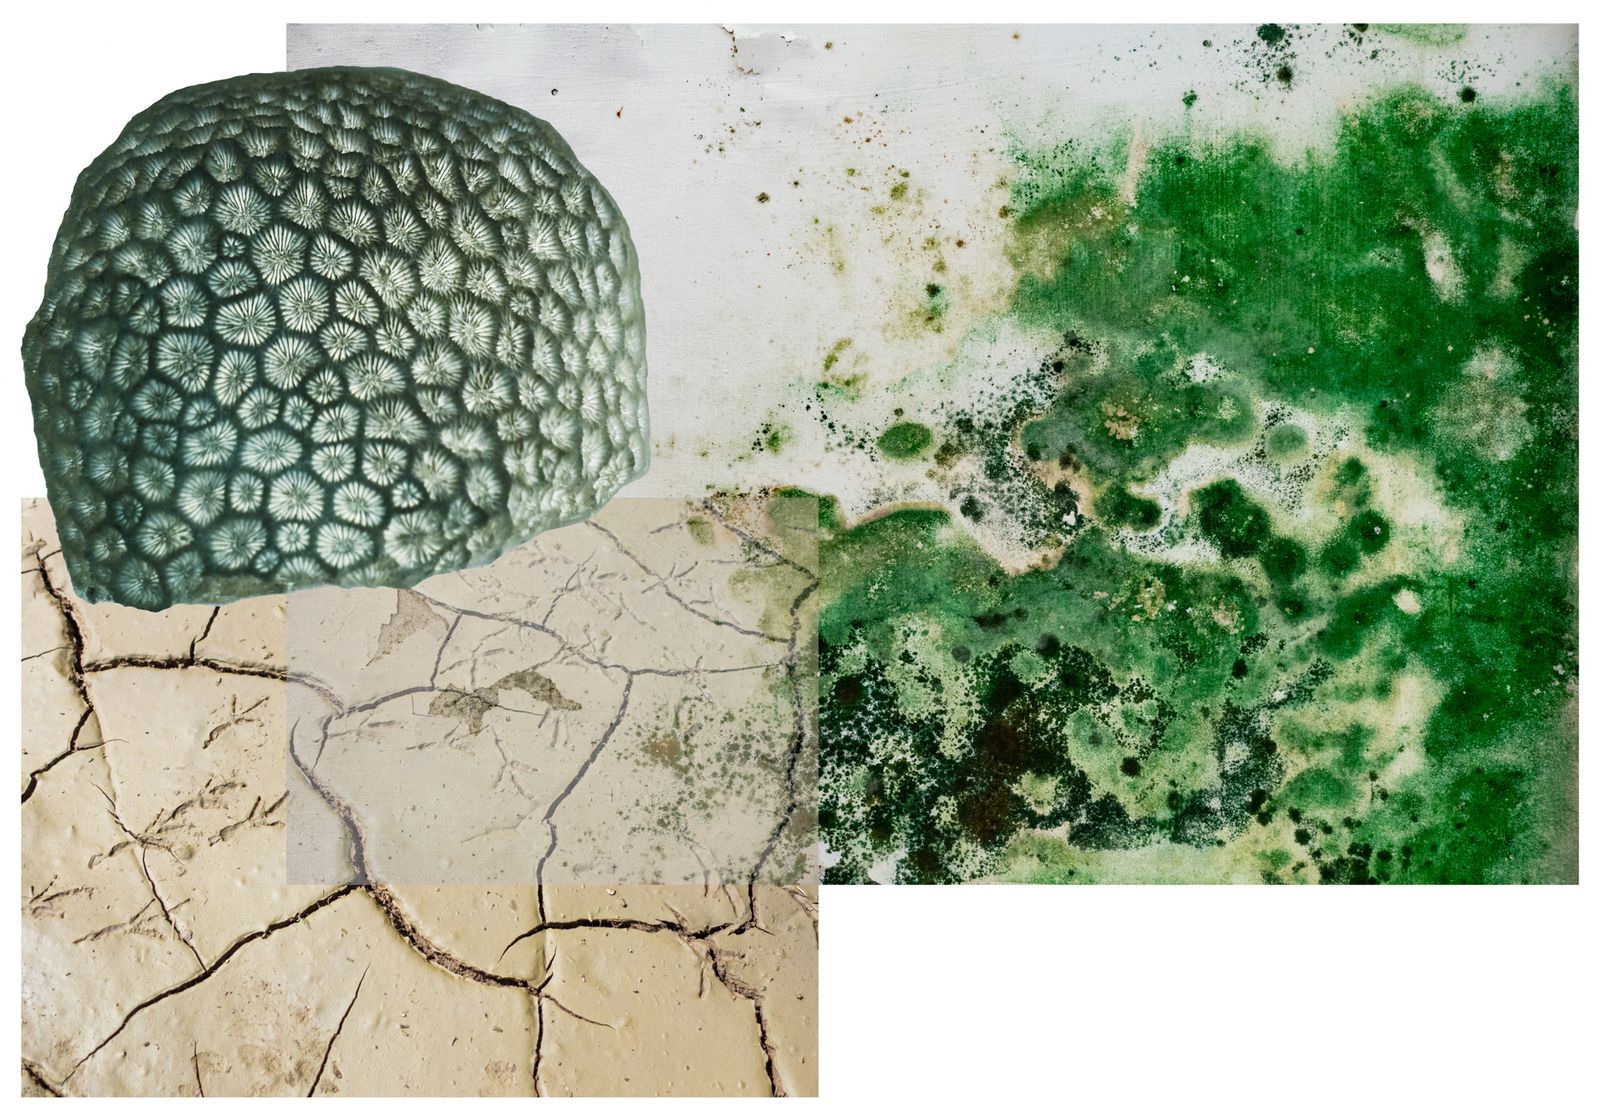 © Florence Iff - biodiversity, prehistoric coral, dried up ground, bird traces, algae and bacteria on wall